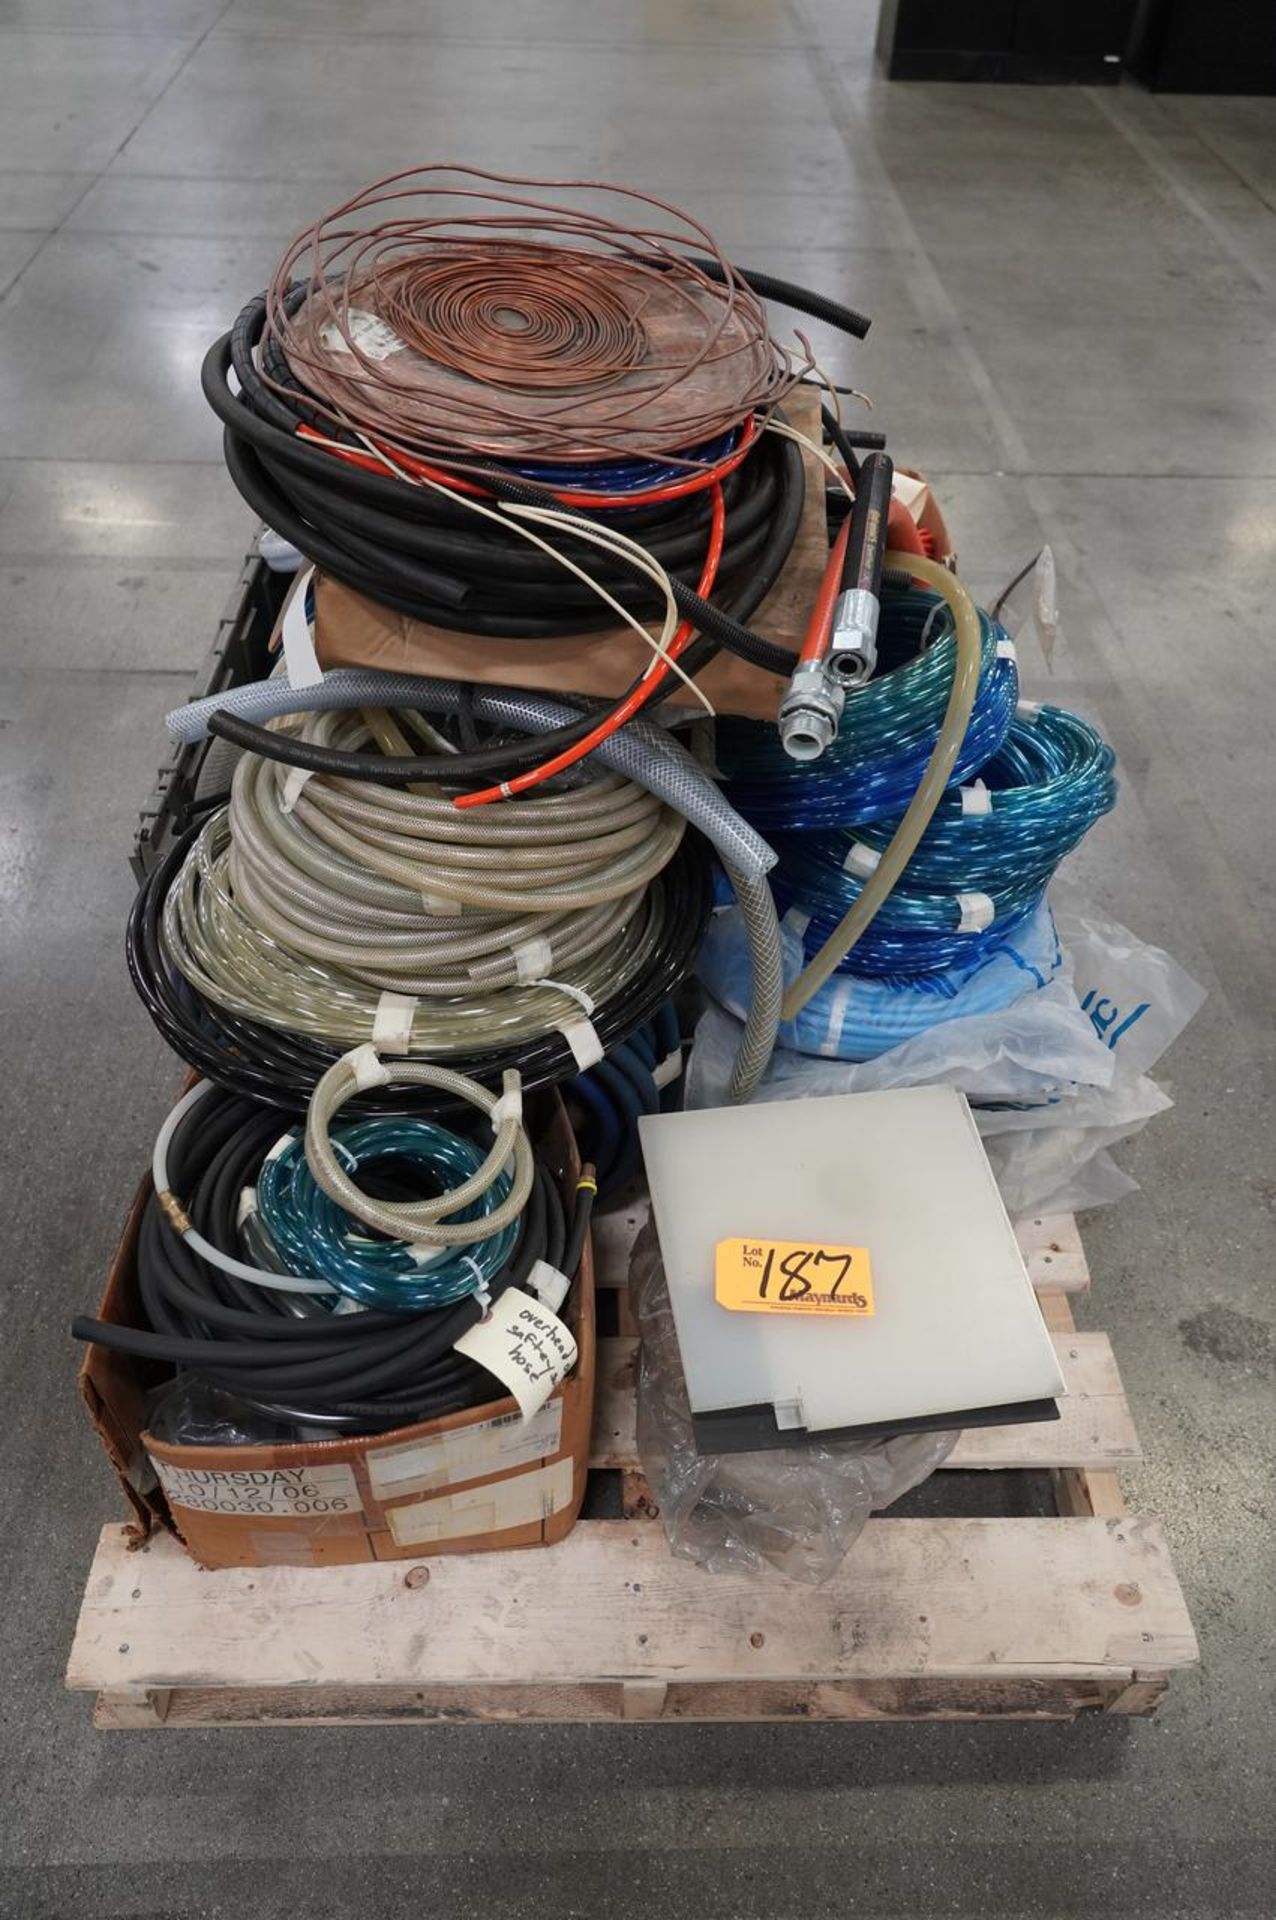 (1) Skid of Assorted Air Hoses and Copper Lines